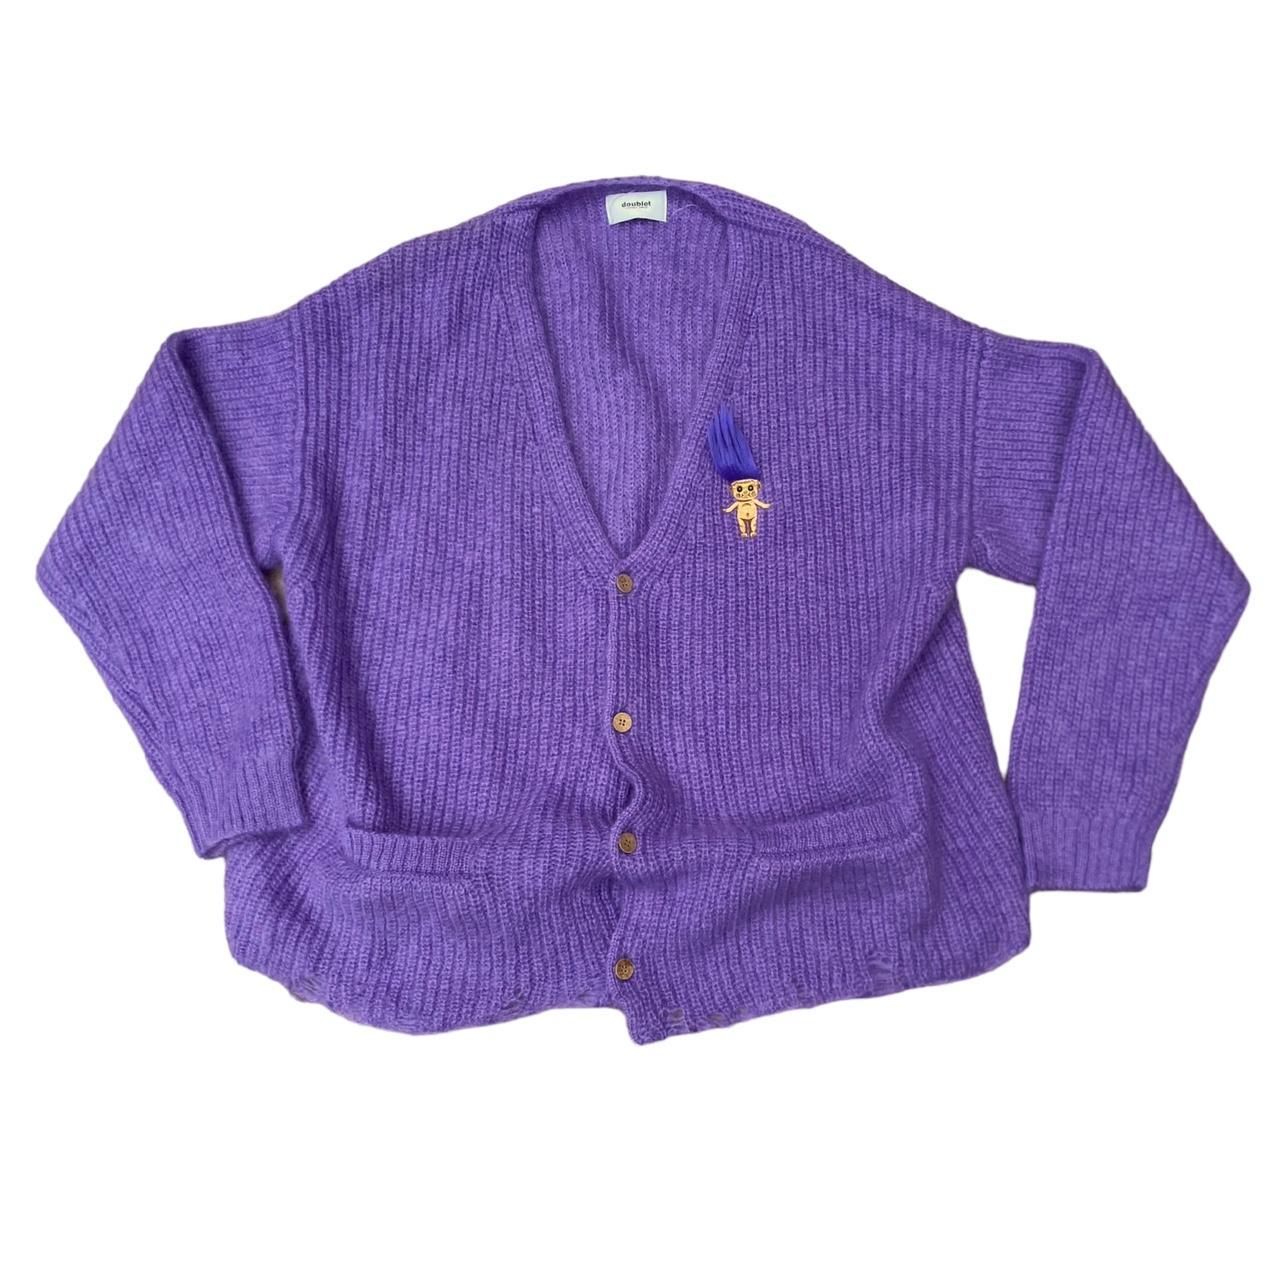 Doublet Doll Embroidered Troll Cardigan Purple...